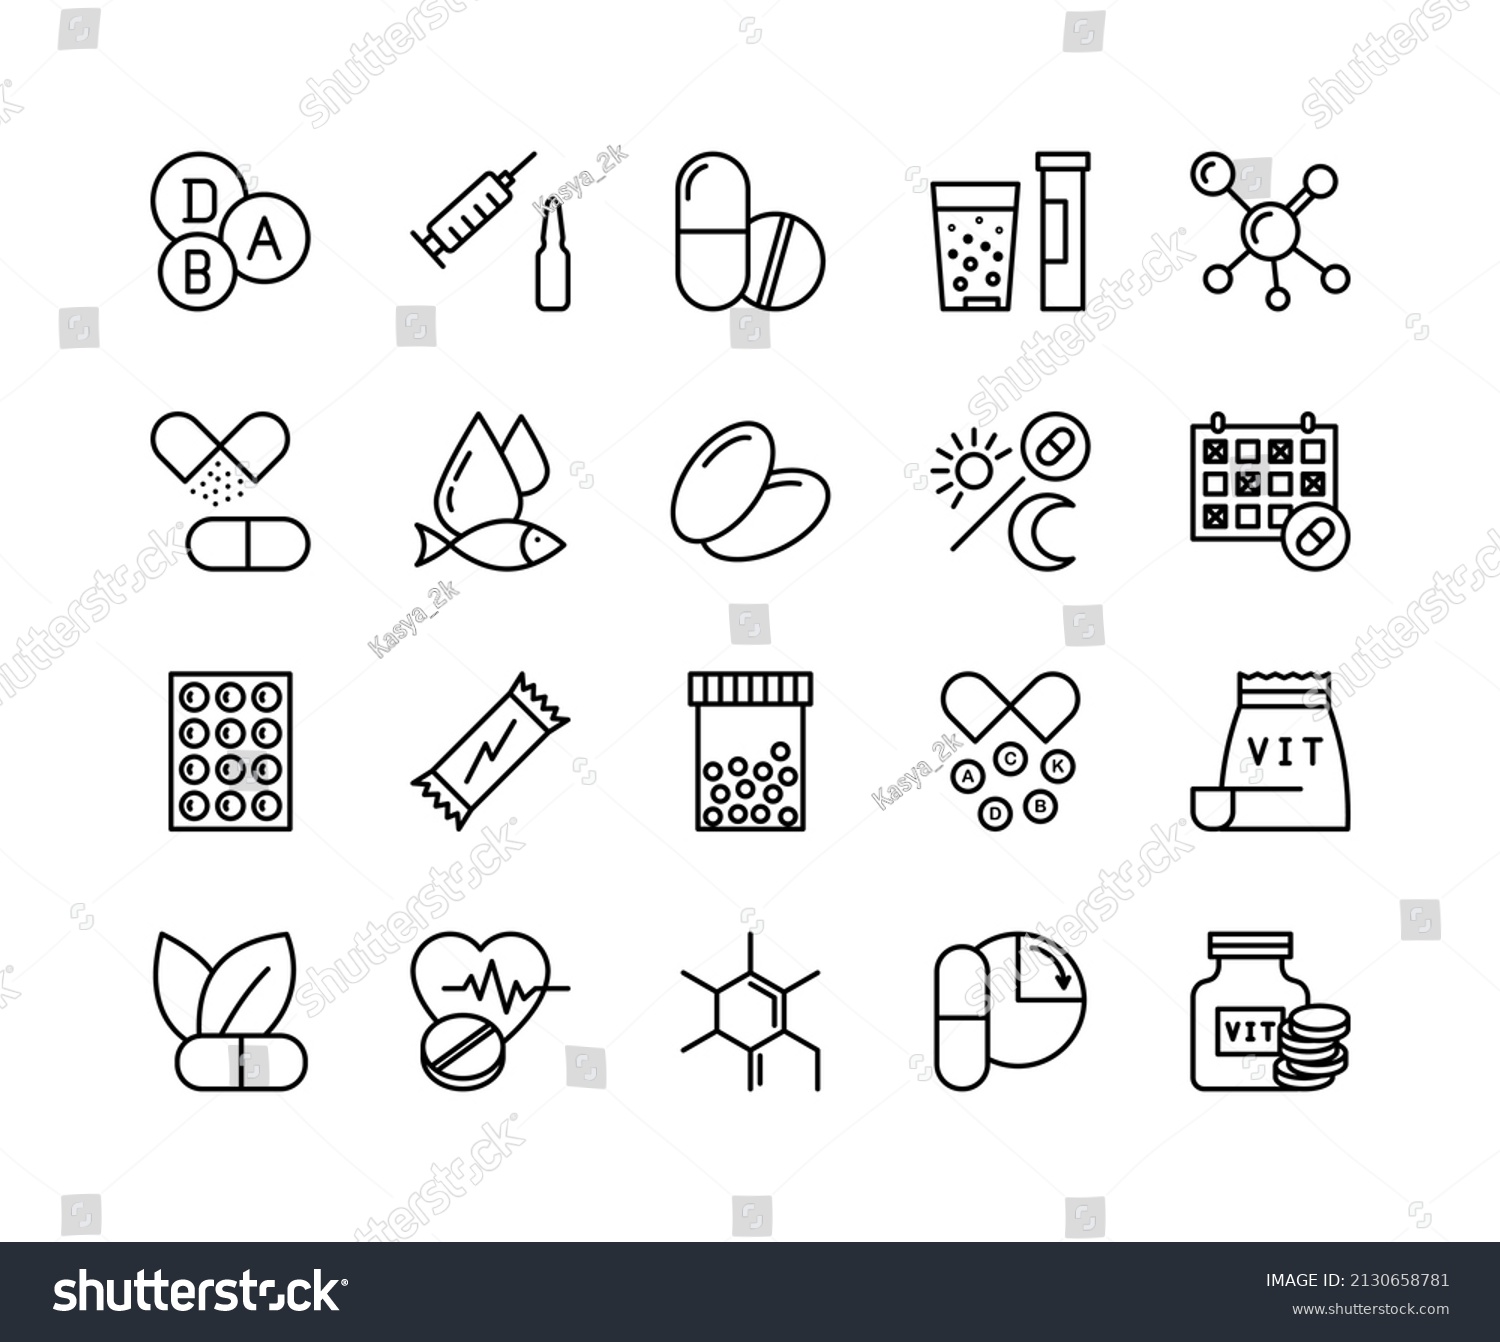 Vitamin nutrition  flat line icons set. Healthy food supplement - Vitamin, Mineral supplement, Pill, Bottle, health food. Simple flat vector illustration for web site or mobile app. #2130658781